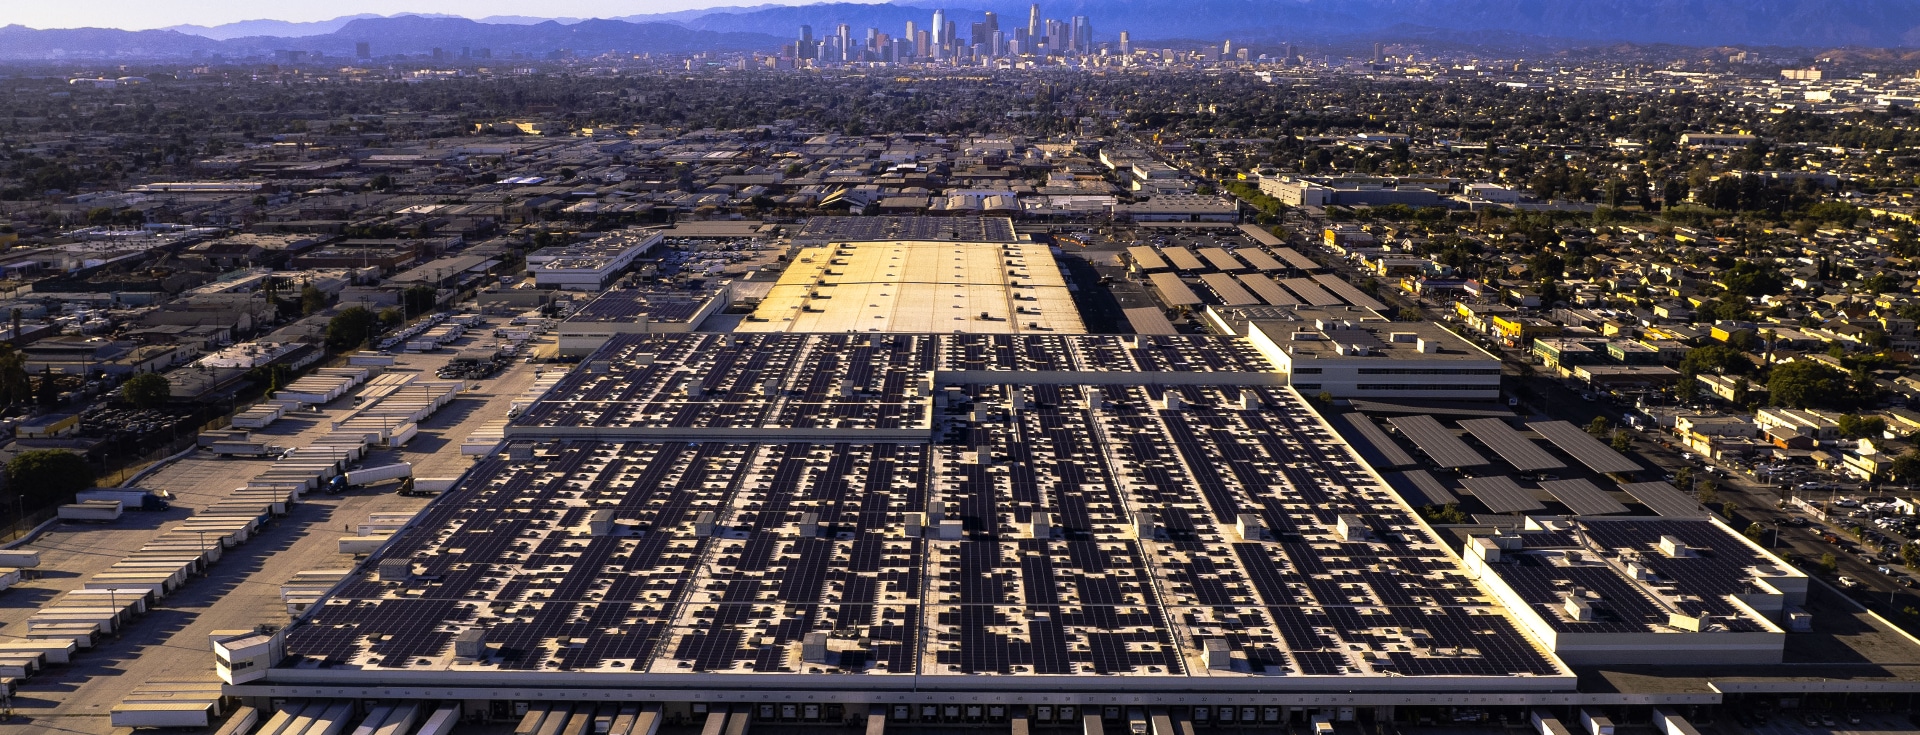 Overhead shot of distribution facility with Los Angeles skyline.